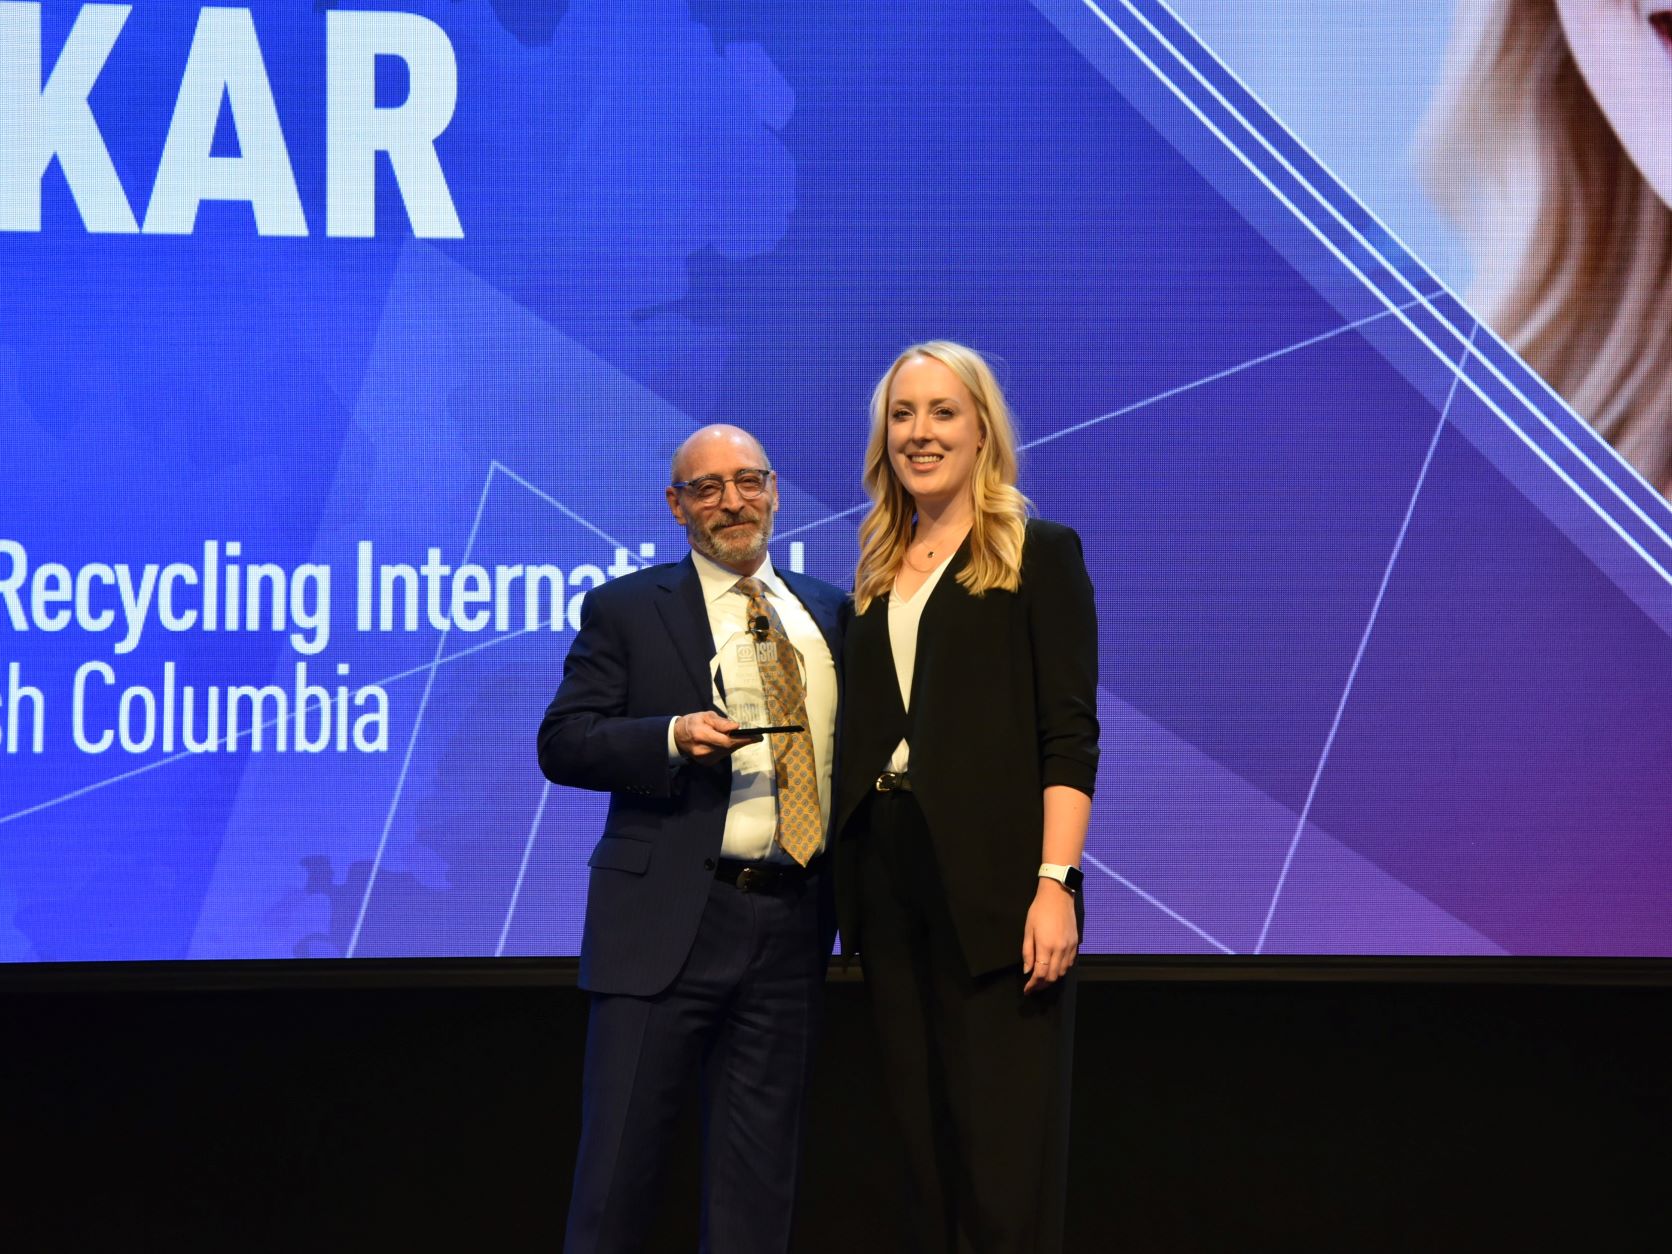 ISRI’s Annual Young Executive of the Year Award Honors Upcoming Industry Leaders